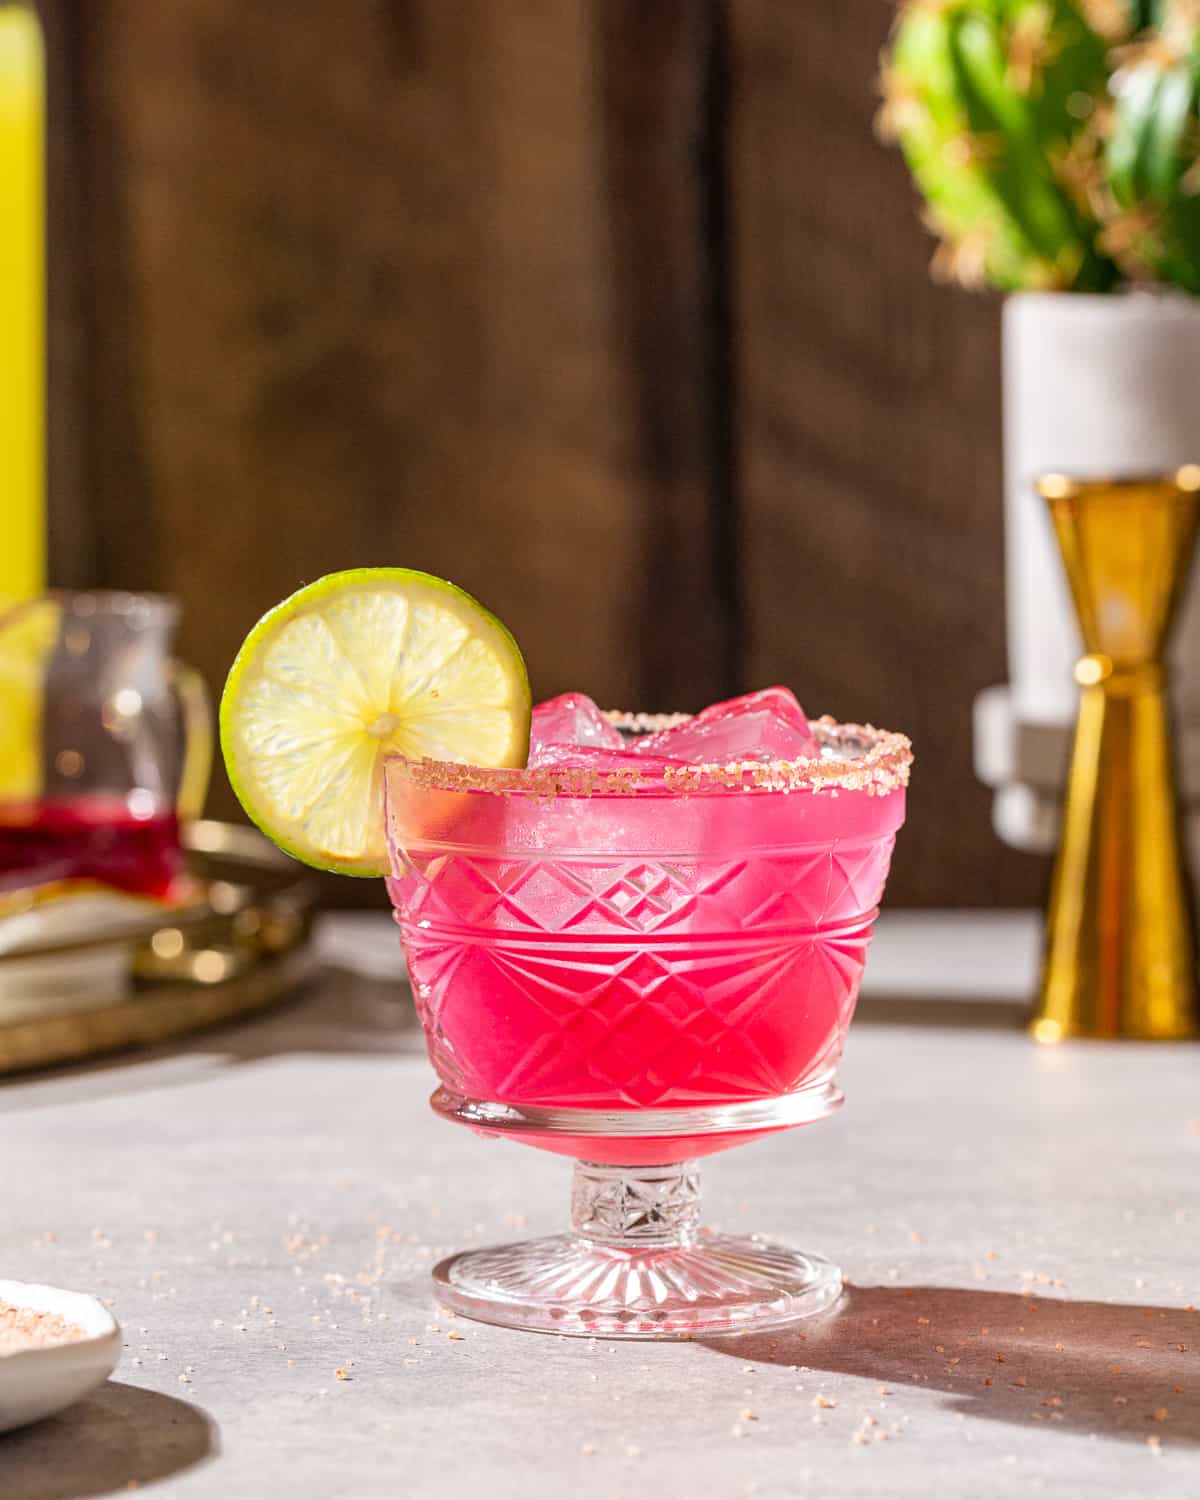 Side view of a pink colored prickly pear margarita in a short-stemmed serving glass with a salted rim. There is a jigger, cactus, bottle of Limoncello and a small jug of prickly pear syrup in the background.